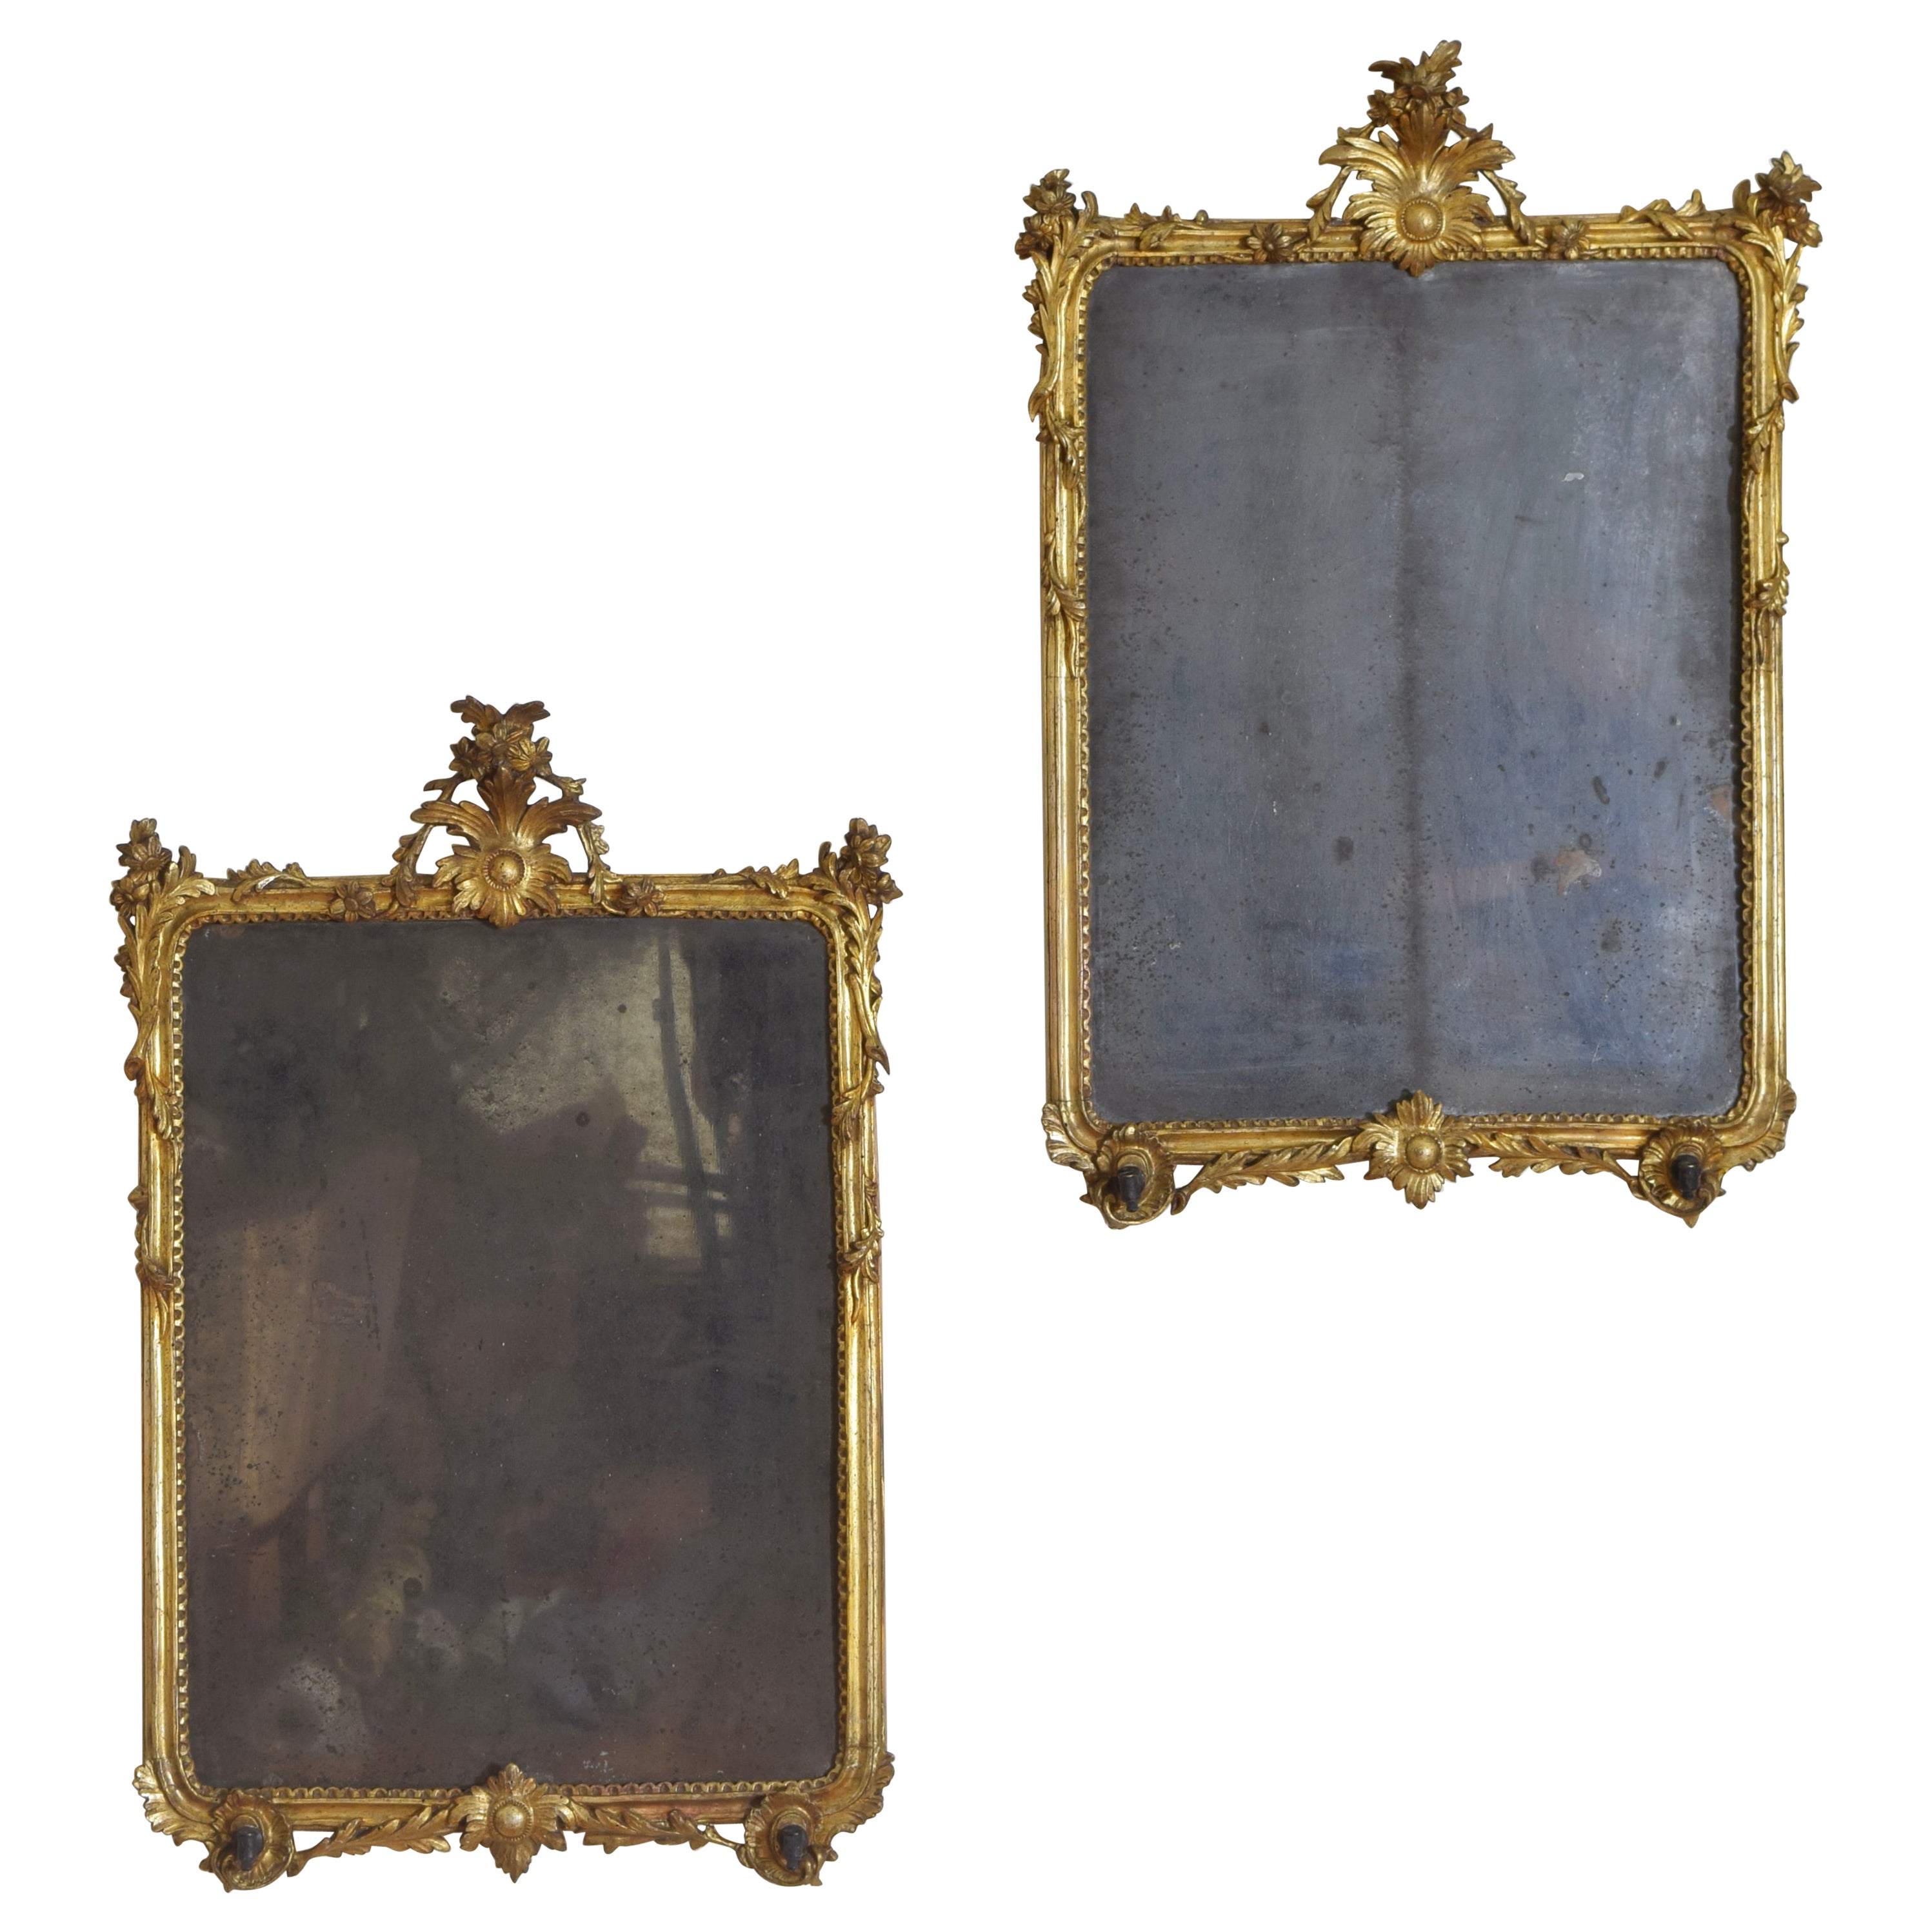 Southern Italian, Calabria, Rococo Pair of Giltwood Mirrors, 1st half 18th cen.